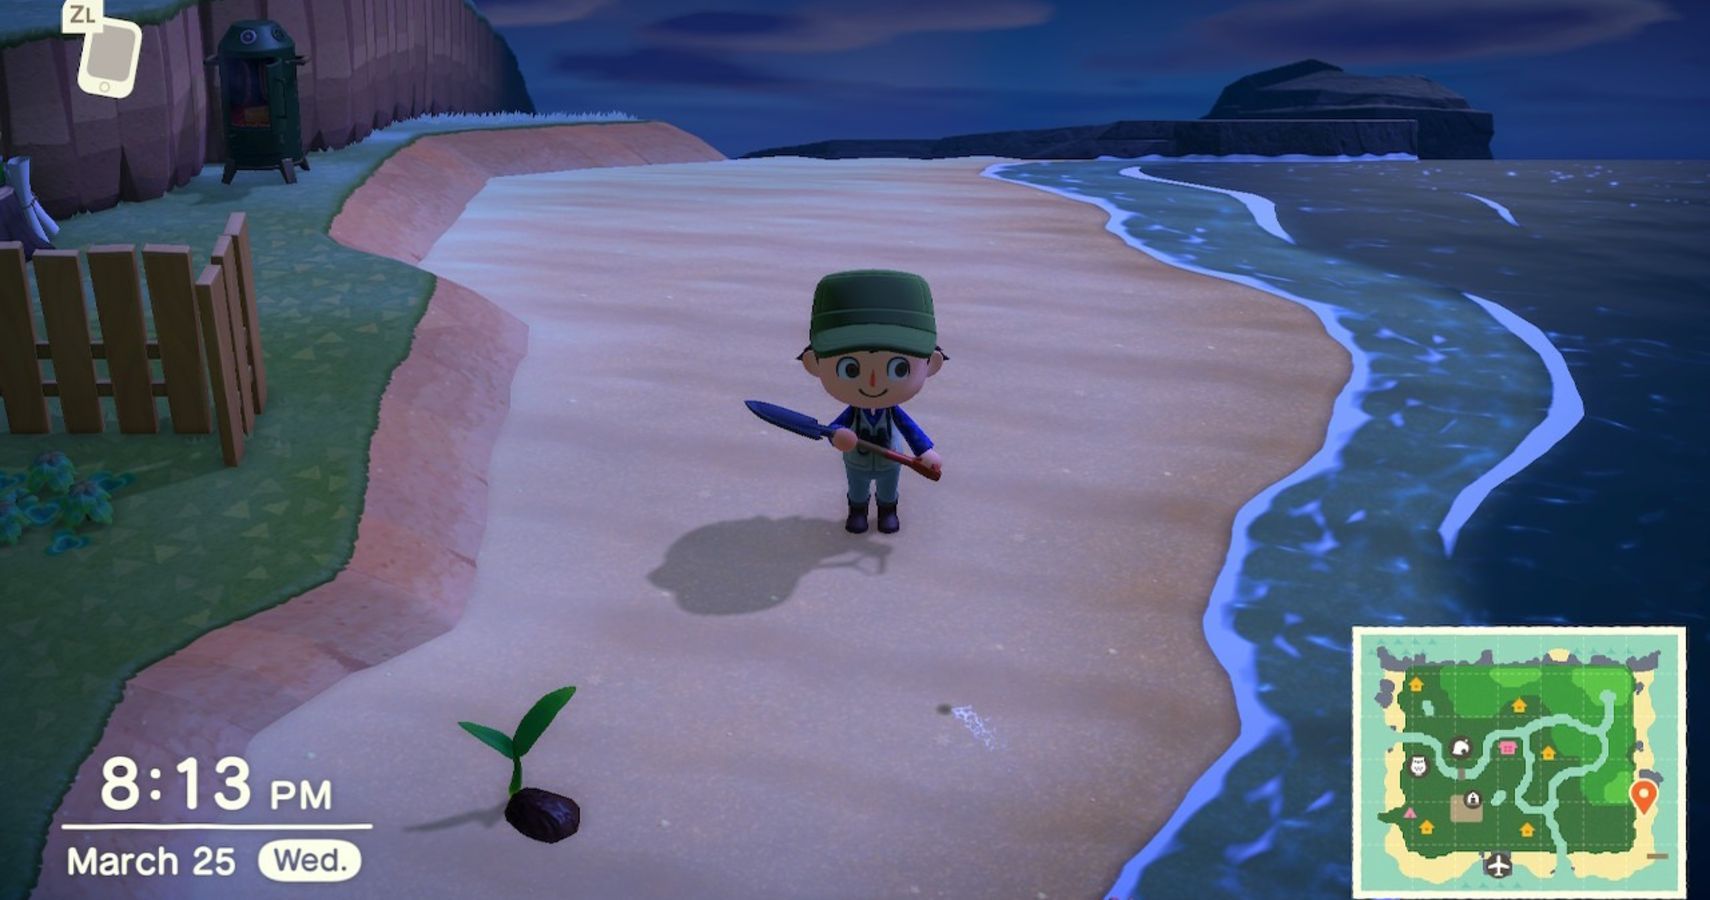 Animal Crossing New Horizons player next to a manila clam/communicator part dig spot in Animal Crossing: New Horizons.